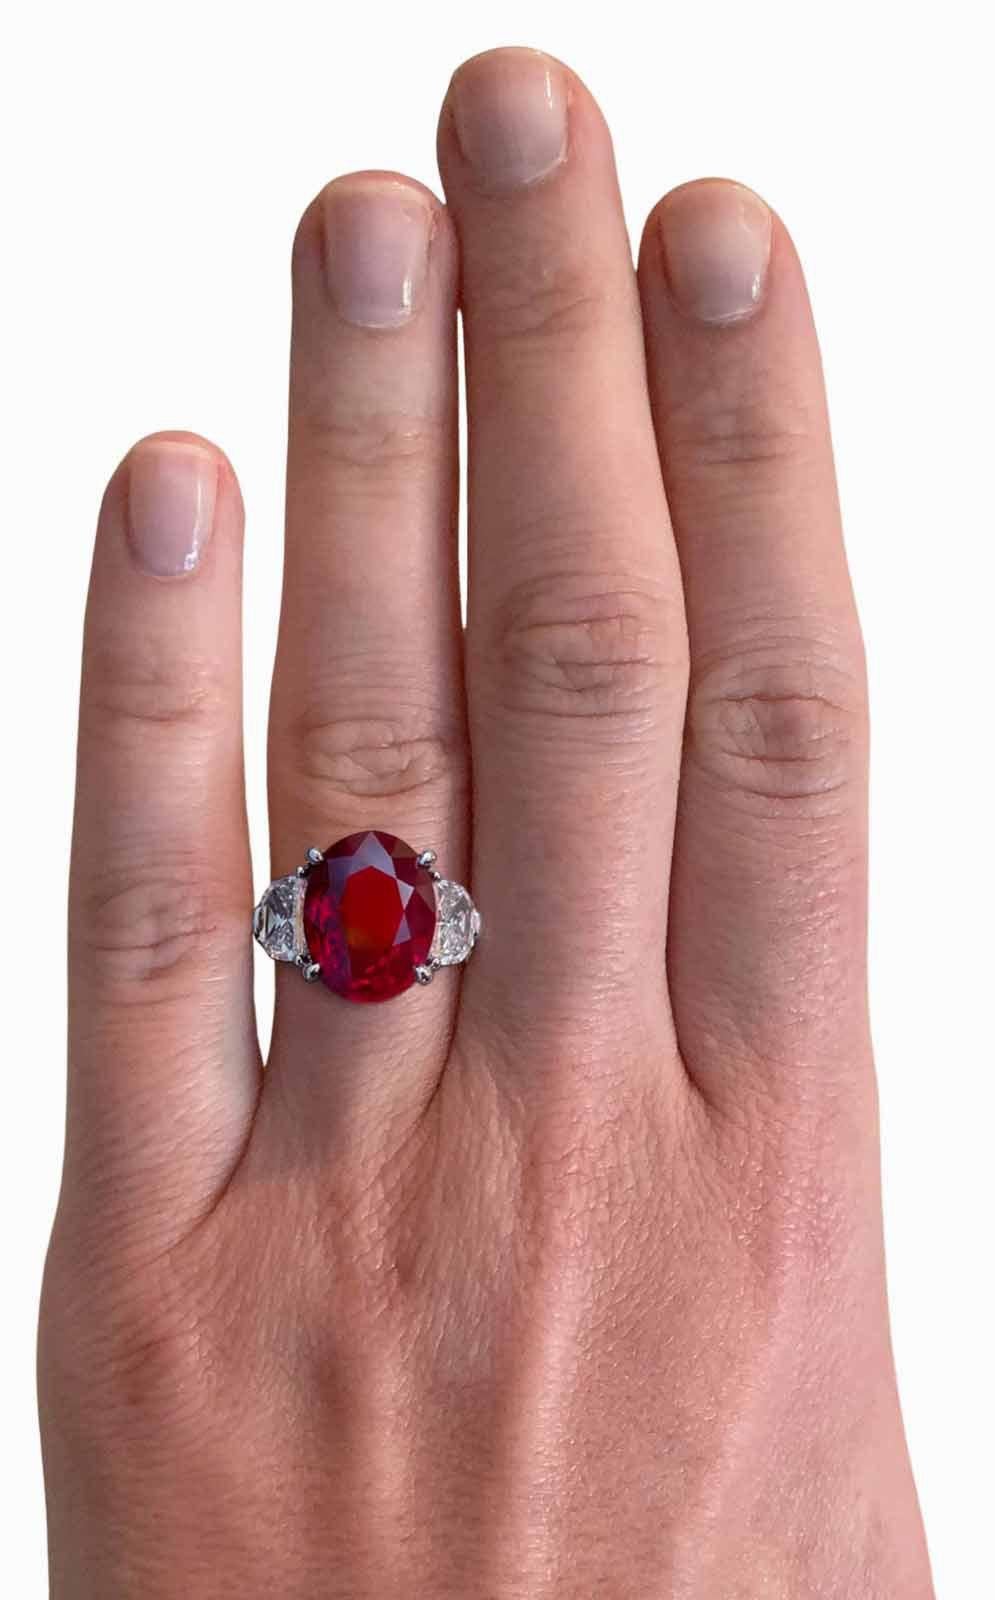 4GIA certified oval cut ruby is completely unheated and displays striking, vibrant red color! The ruby is certified by GIA, the premier gemological authority. GIA determined the ruby to be unheated and completely natural earth mined. The vast